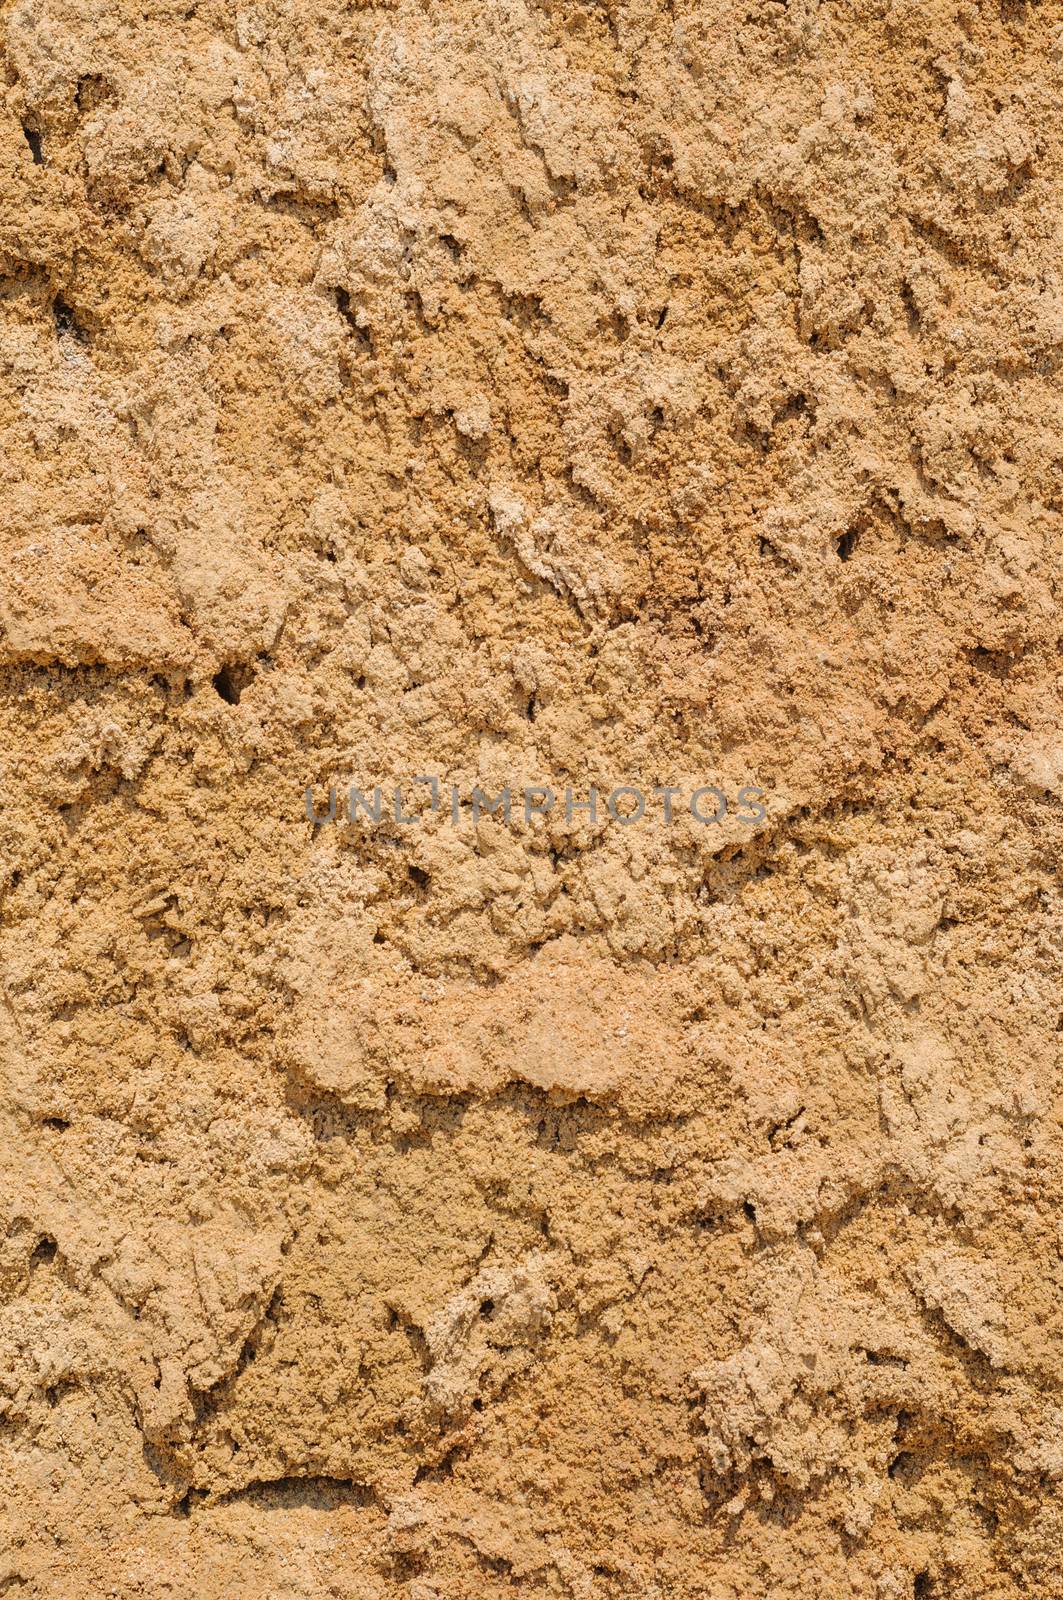 Dry soil and sand closeup natural texture